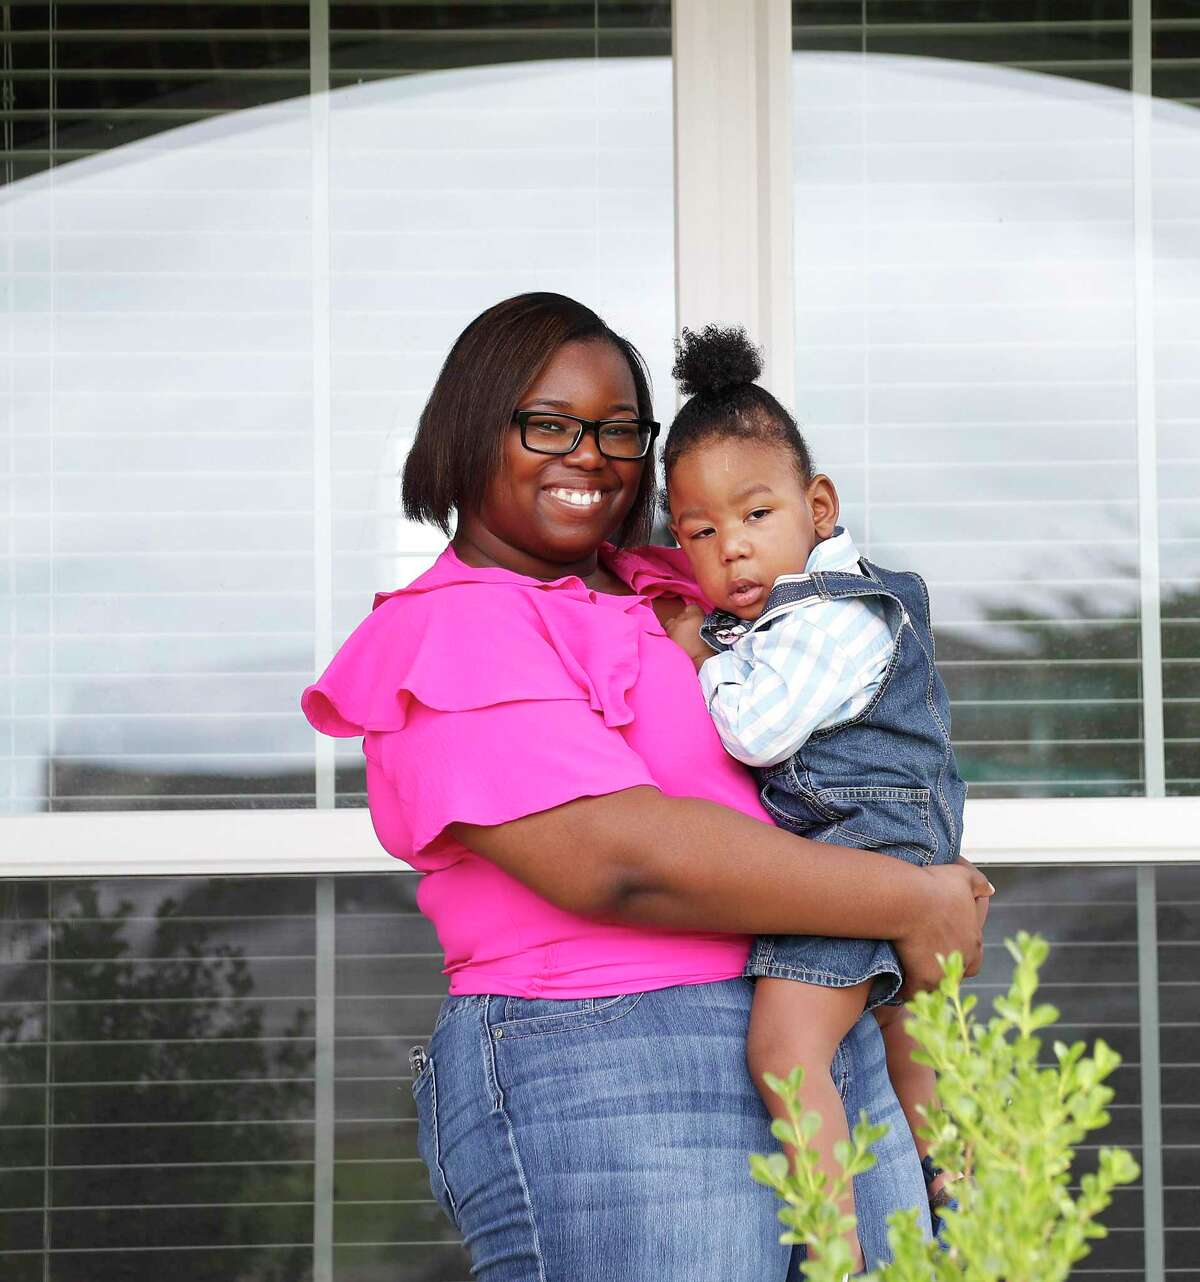 Aisha Atkinson with her two-year-old son, Aries, at home, in Rosenberg, Saturday, May 16, 2020. Aries was born at 23 weeks gestation. He had two massive brain bleeds and spent 150 days in the NICU. He will have chronic hydrocephalus and cerebral palsy his entire life, doctors estimate. Aries is one out of four babies to use a new device called CTOT, which is a wearable imaging device for awake infants with brain disorders. It was made using night-vision goggle technology, near-infrared light and high-resolution detectors. The device (which is a cap with wires) is used so babies don't have to be put under anesthesia which is super risky for them.